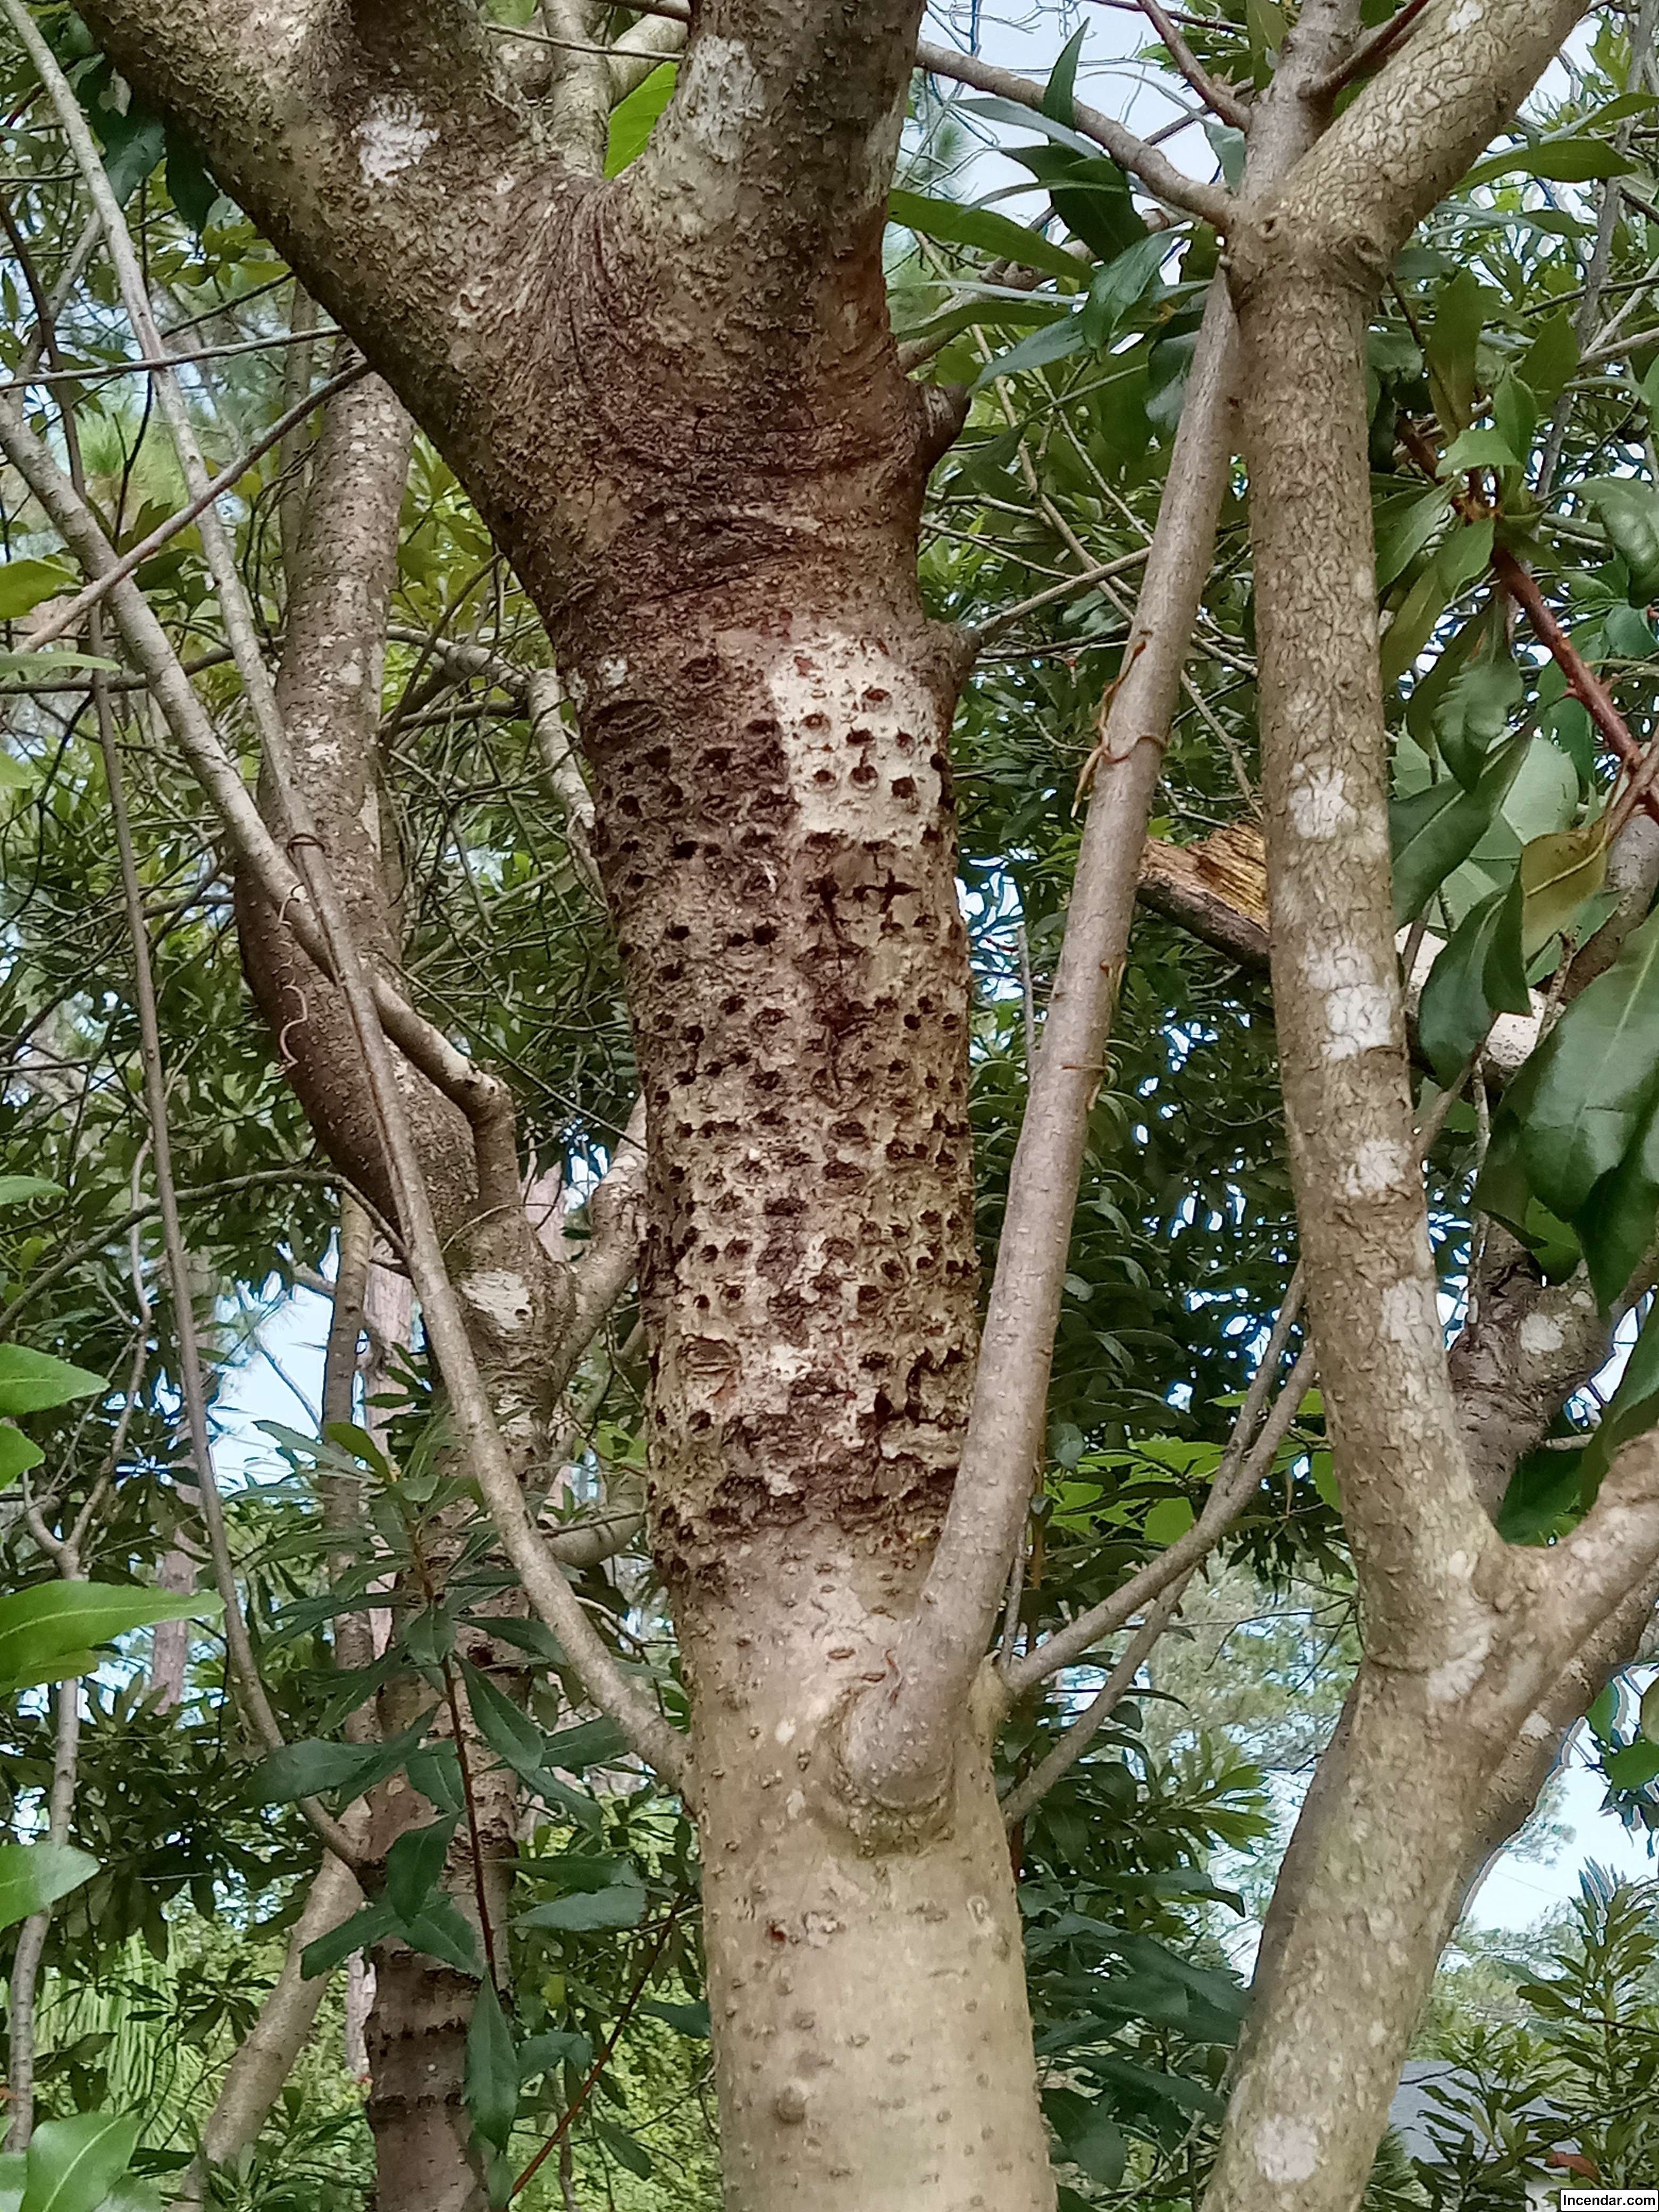 Central Florida Sap Sucker Wood Pecker Damage (4k HD) Image showing holes all around a tree trunk in multiple rows